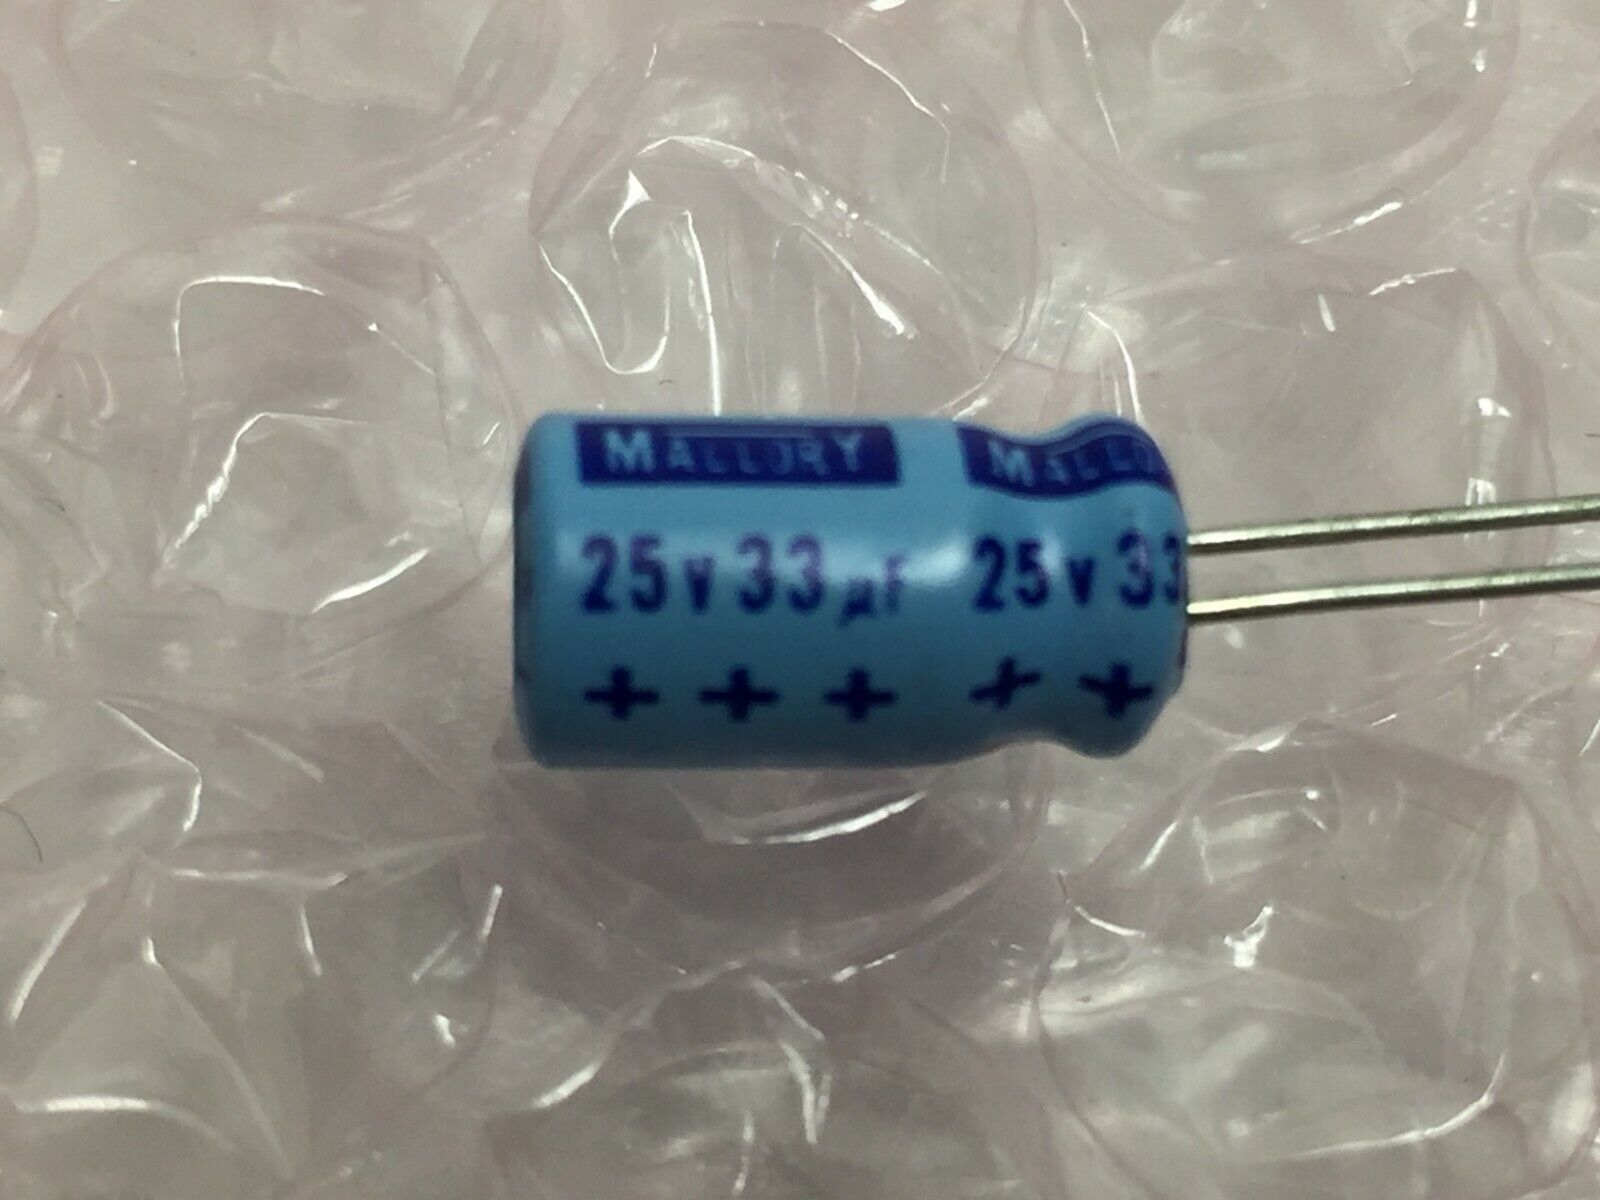 NOS  Mallory 33uF 25v Capacitor   Lot of 33